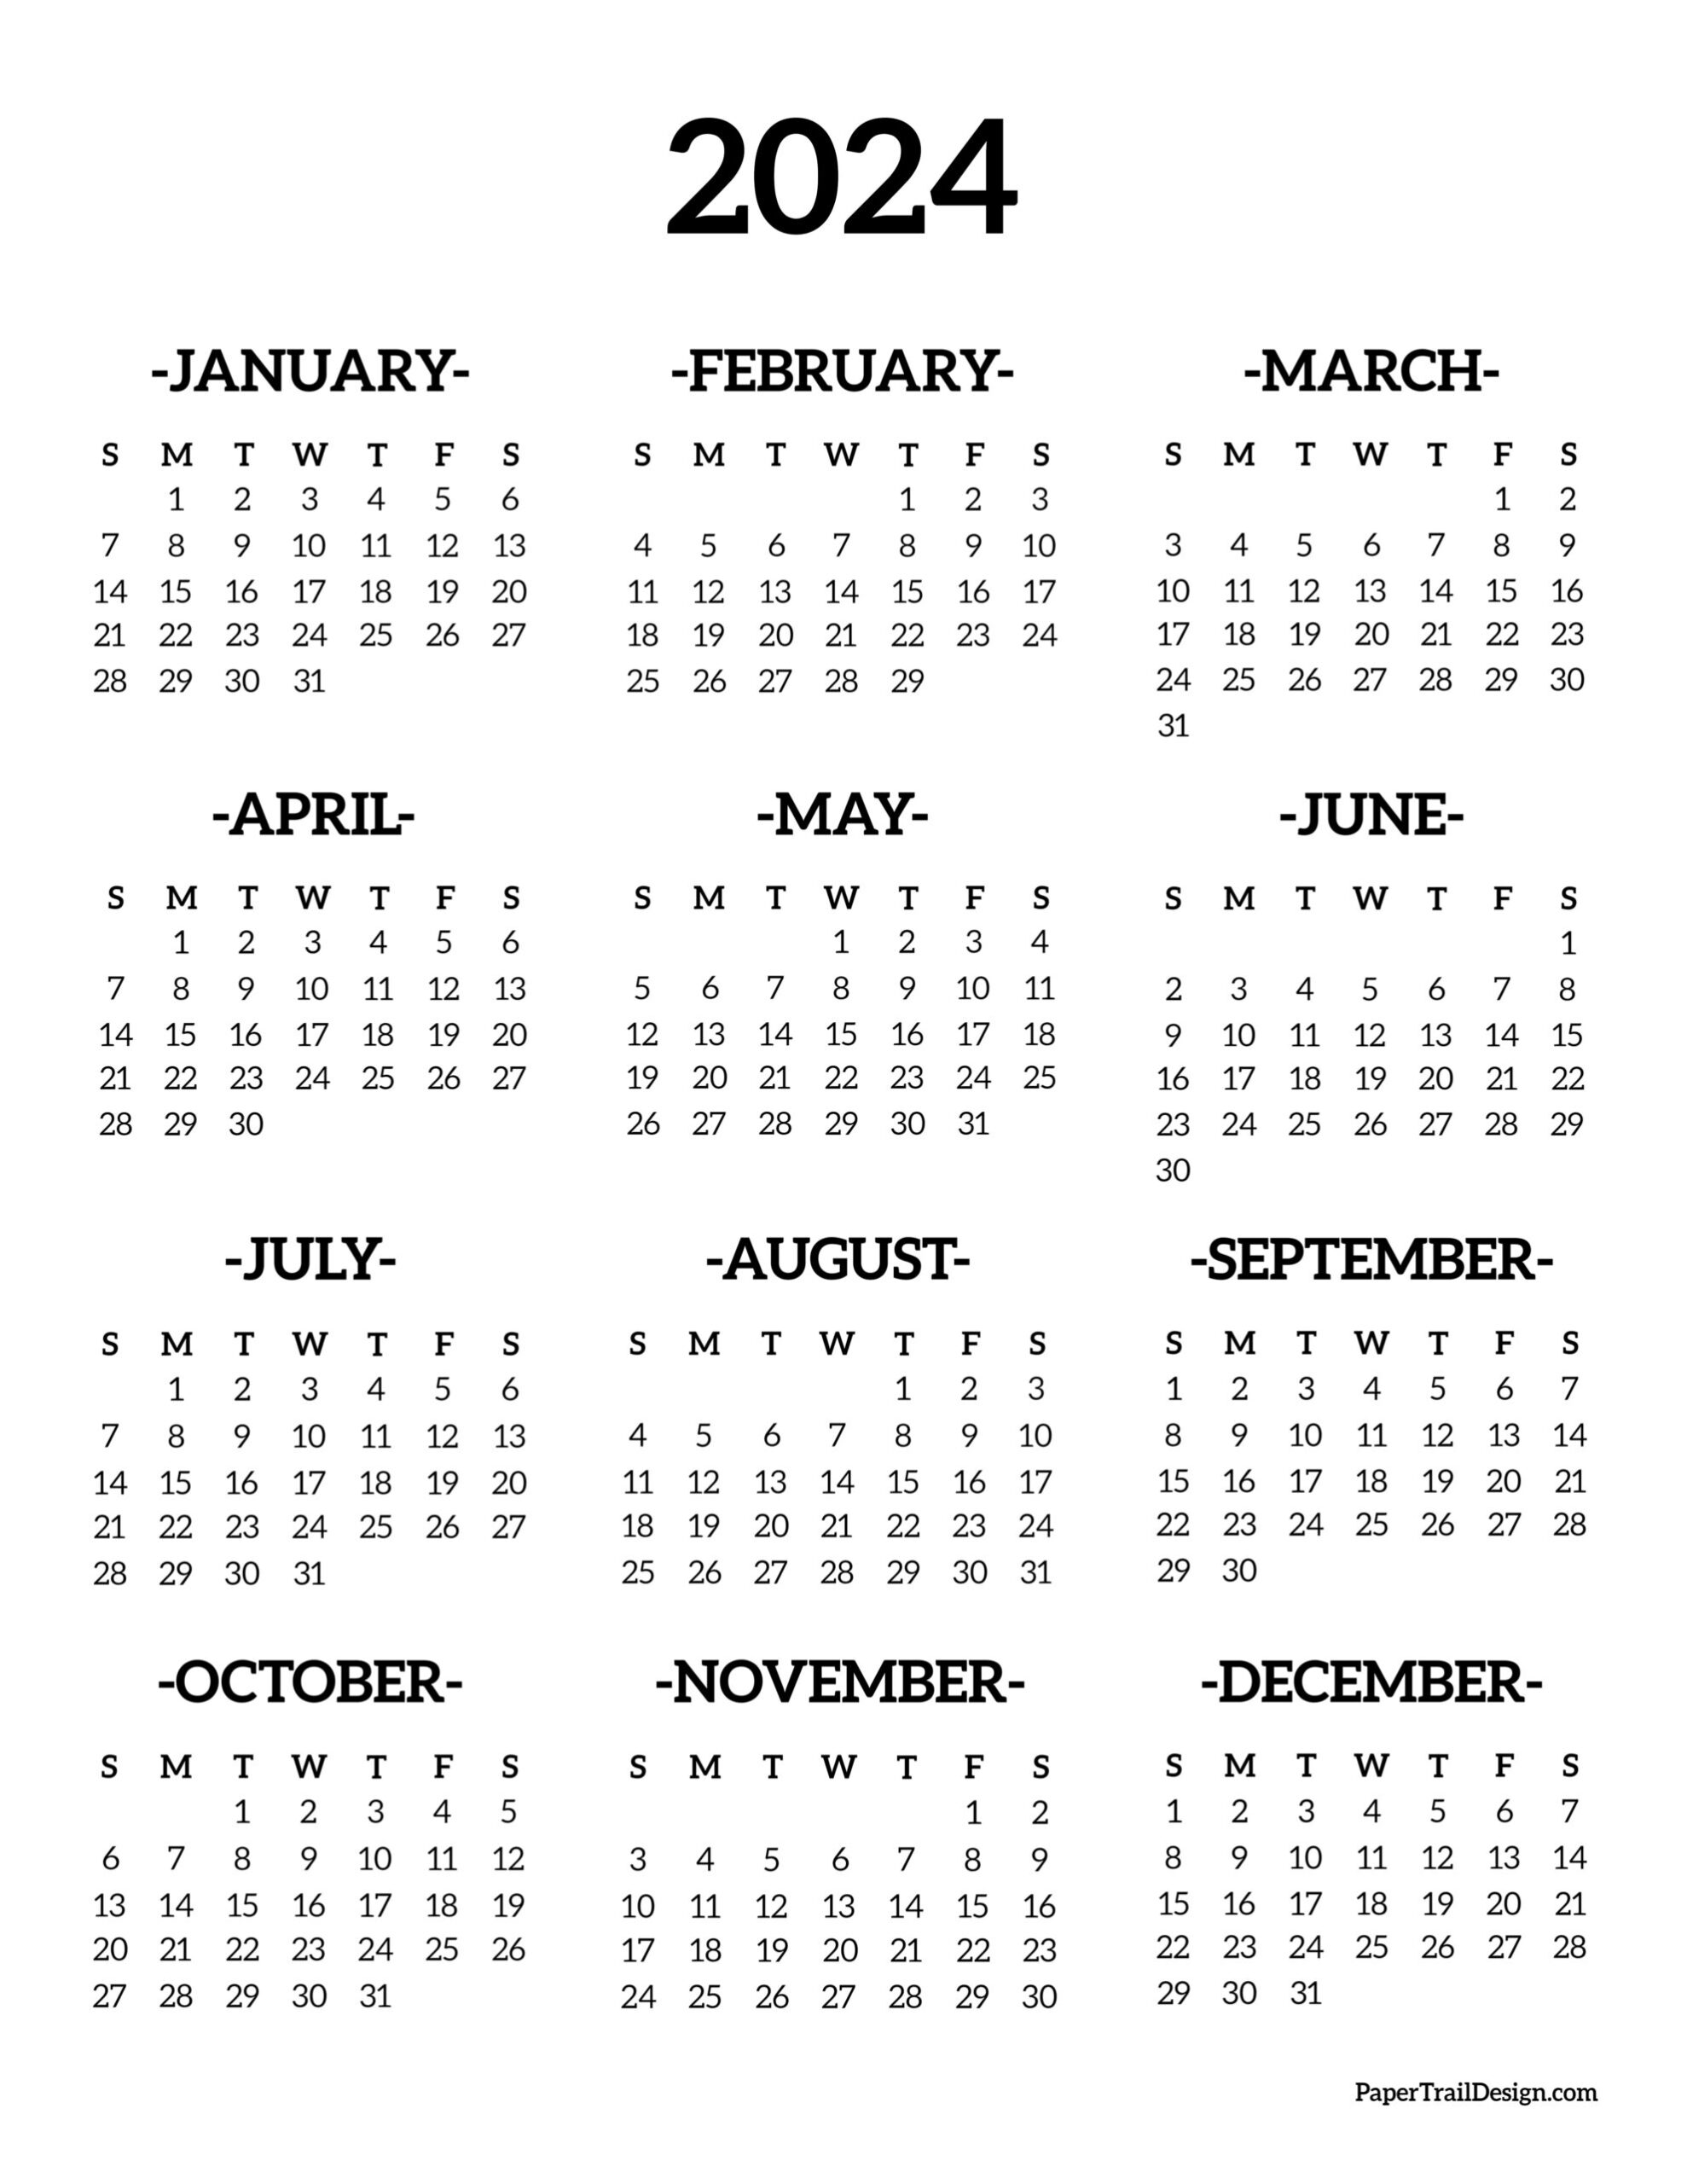 Calendar 2024 Printable One Page - Paper Trail Design for 2024 Calendar Pages Free Printable